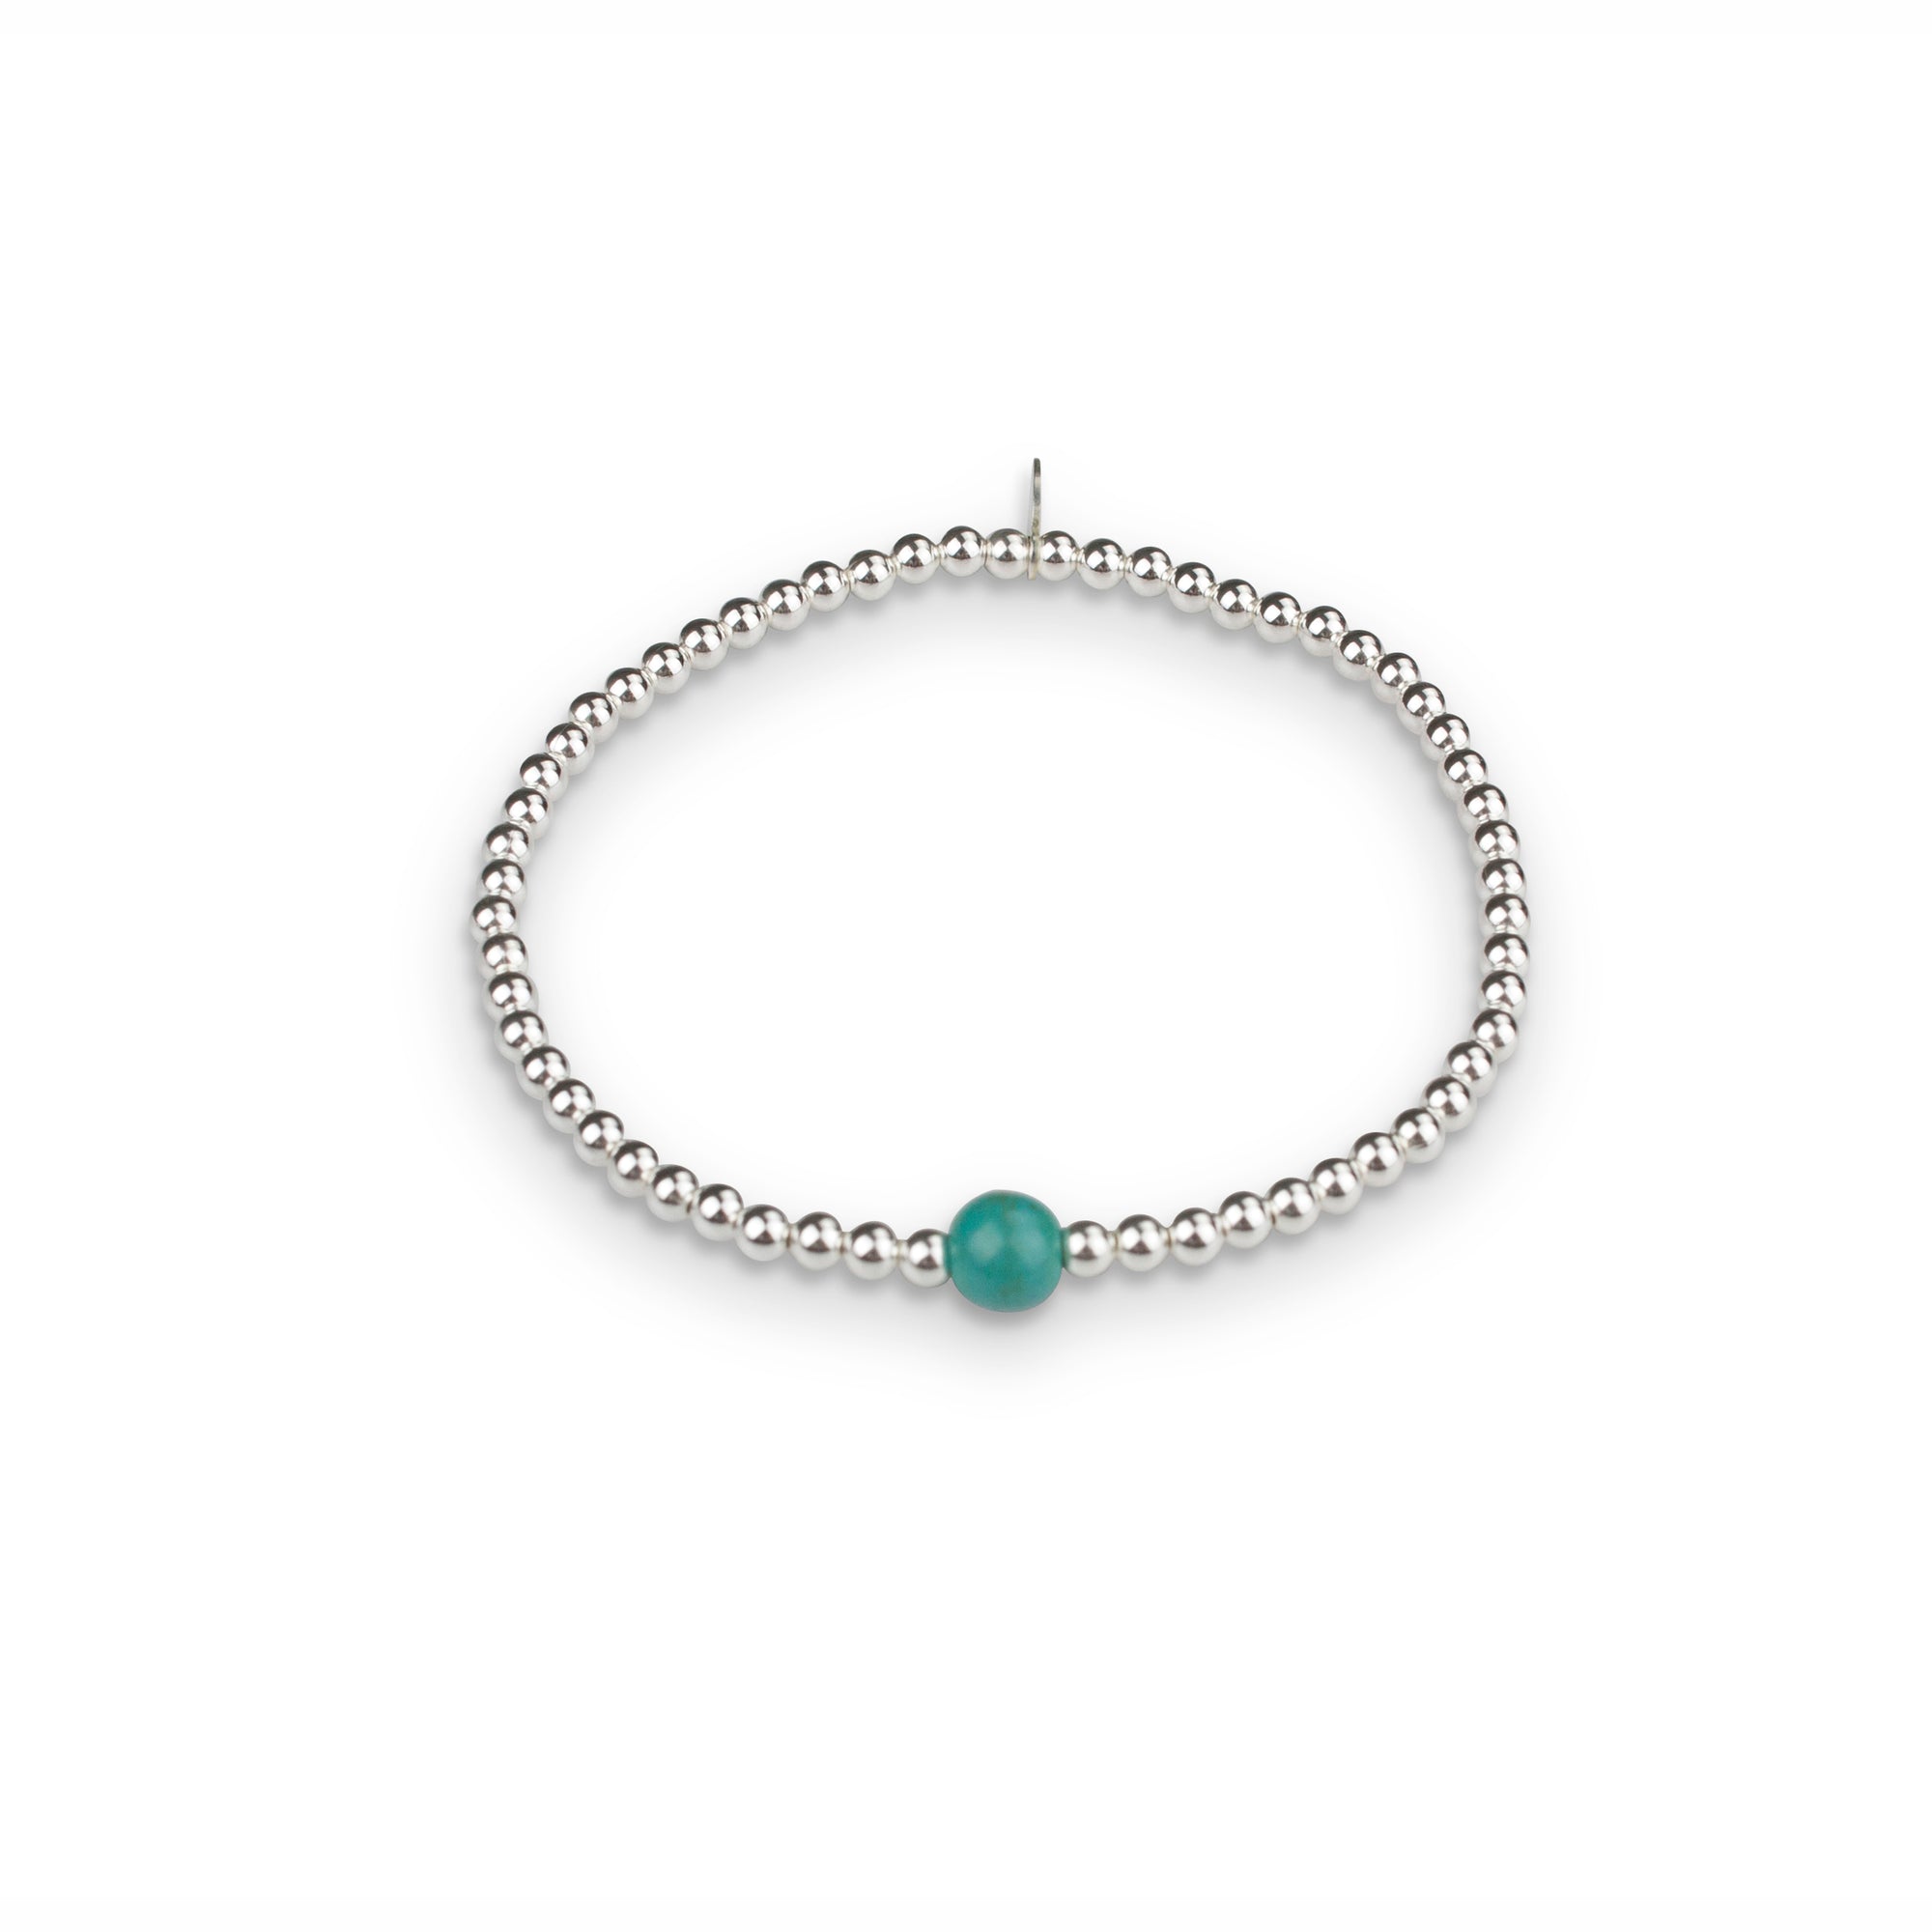 A TOUCH OF TURQUOISE BRACELET